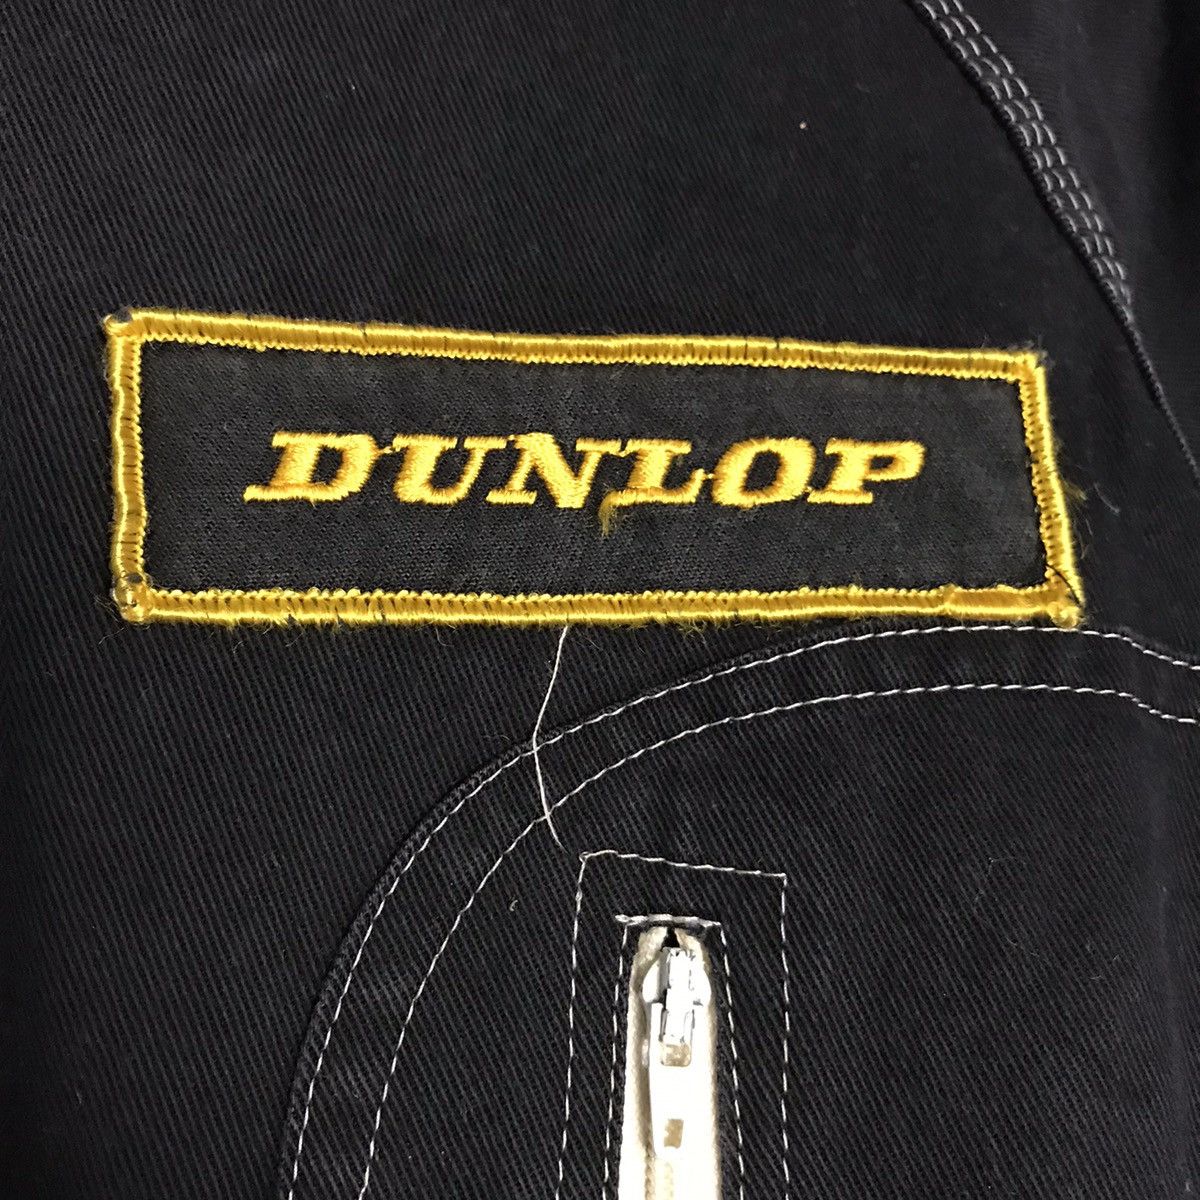 Vintage dunlop circuit fashion racing big spell overall - 6